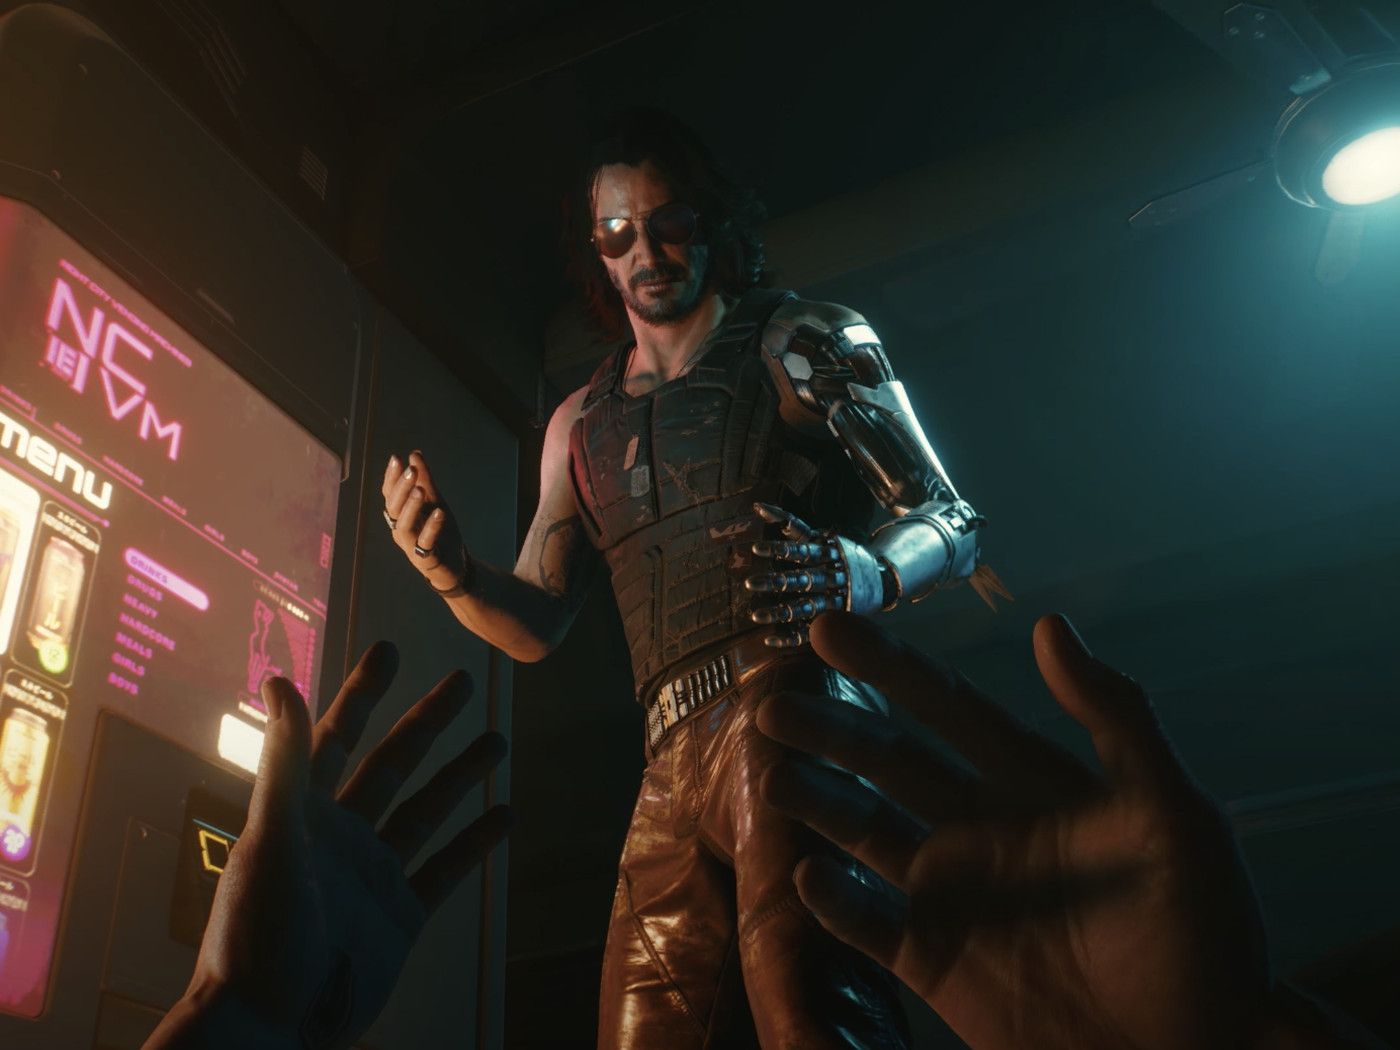 Watch two new gameplay trailers for Cyberpunk 2077